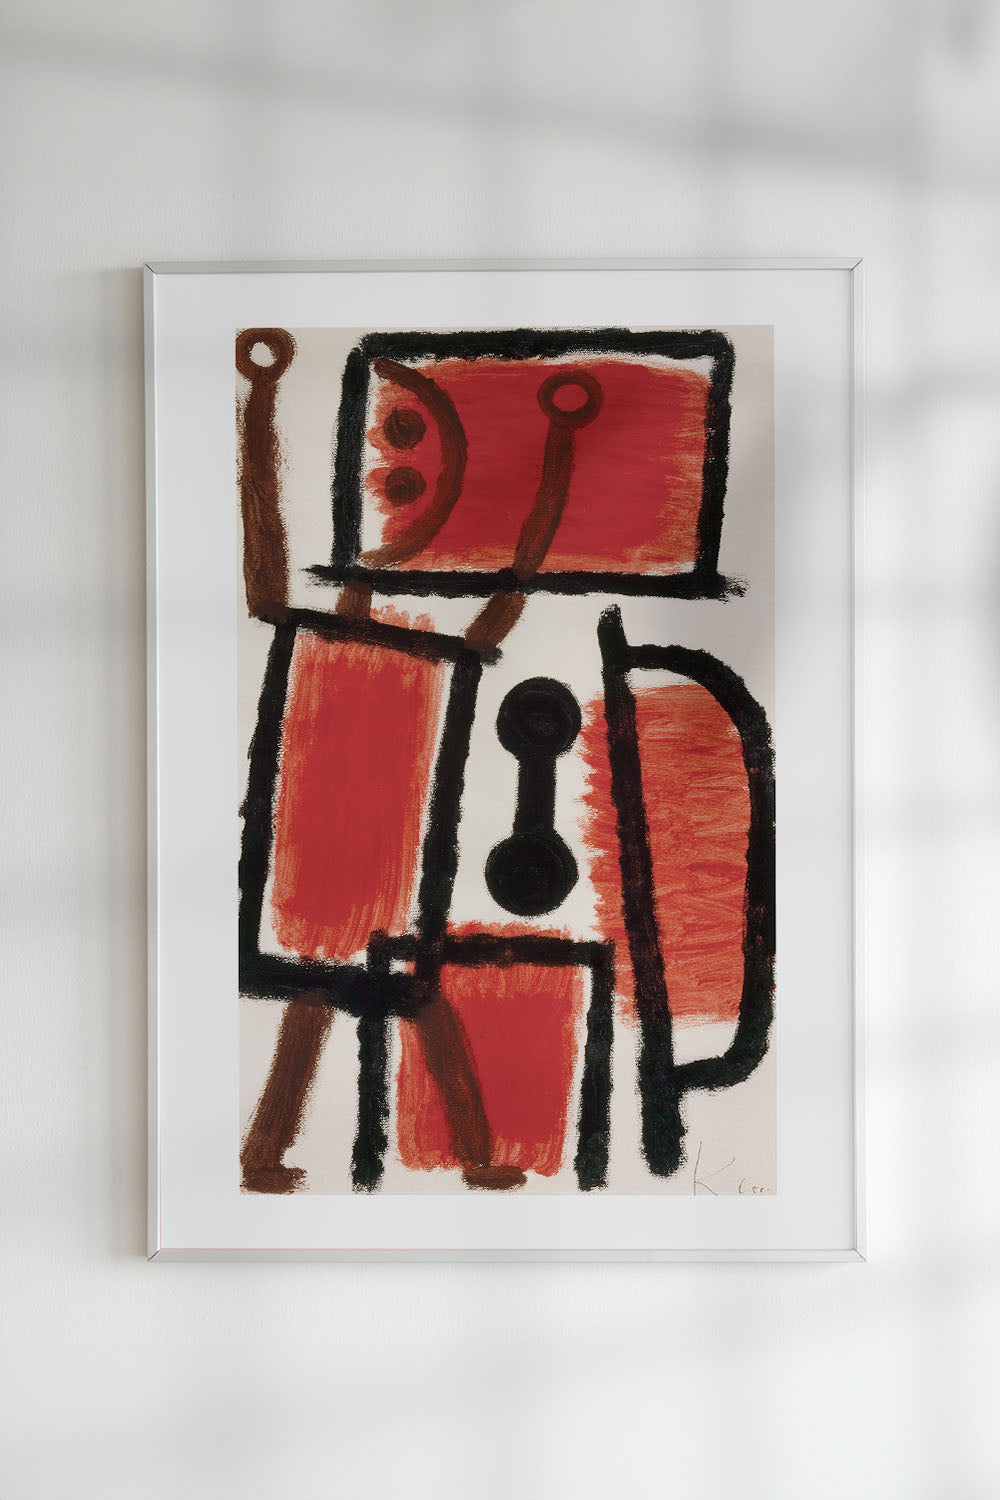 Art print of "Locksmith (1940)" by Paul Klee depicting a humorous red square figure with a black outline and smiley face.